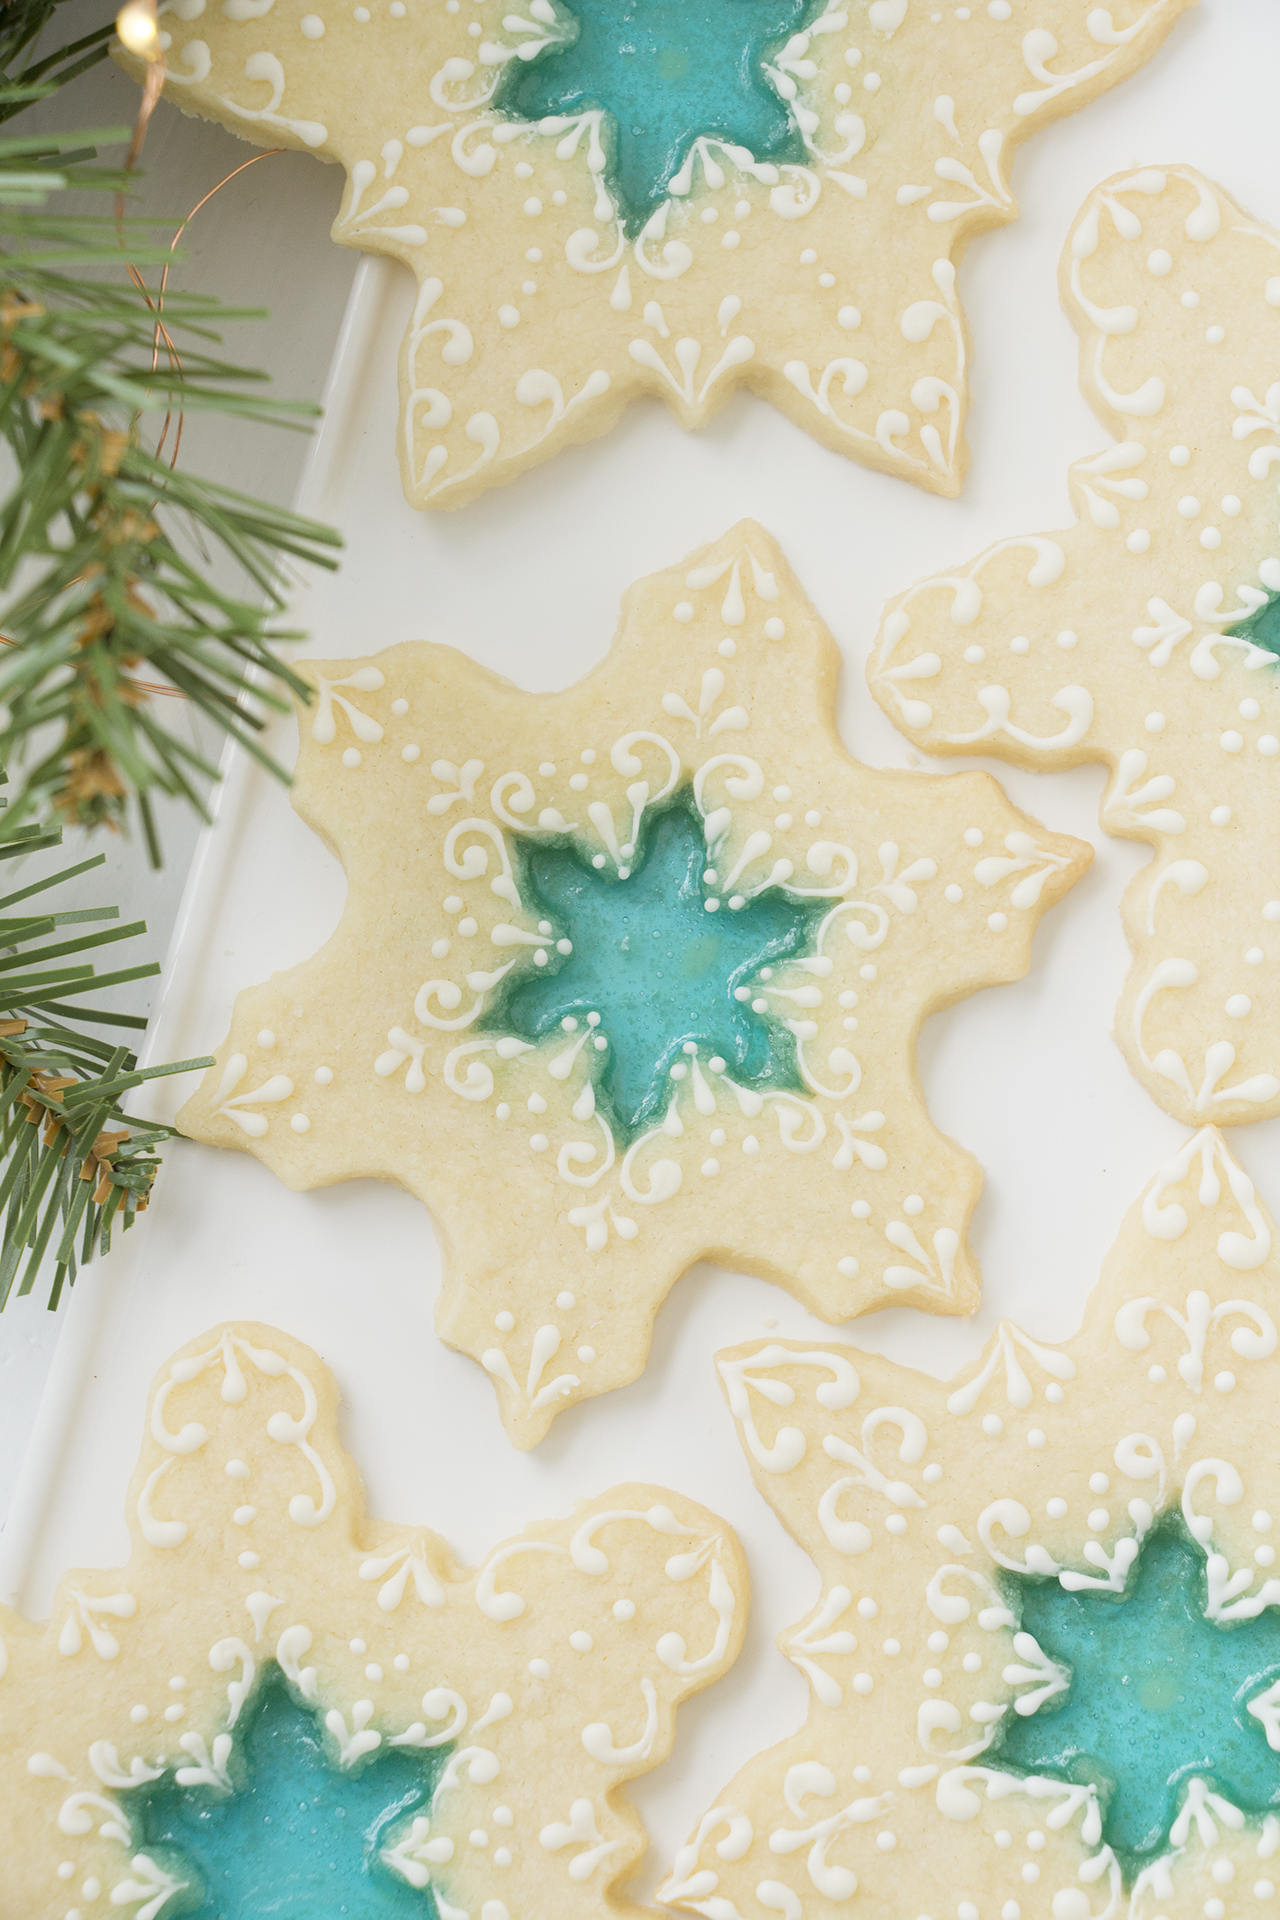 Beautiful stained glass cookies - snowflake cookies with a blue hard candy center that resembles stained glass. The cookies are mostly bare with a little bit of delicate royal icing decorations piped on them. The cookies are on a white rectangular platter on a white background. There is a sprig of evergreen in the foreground.